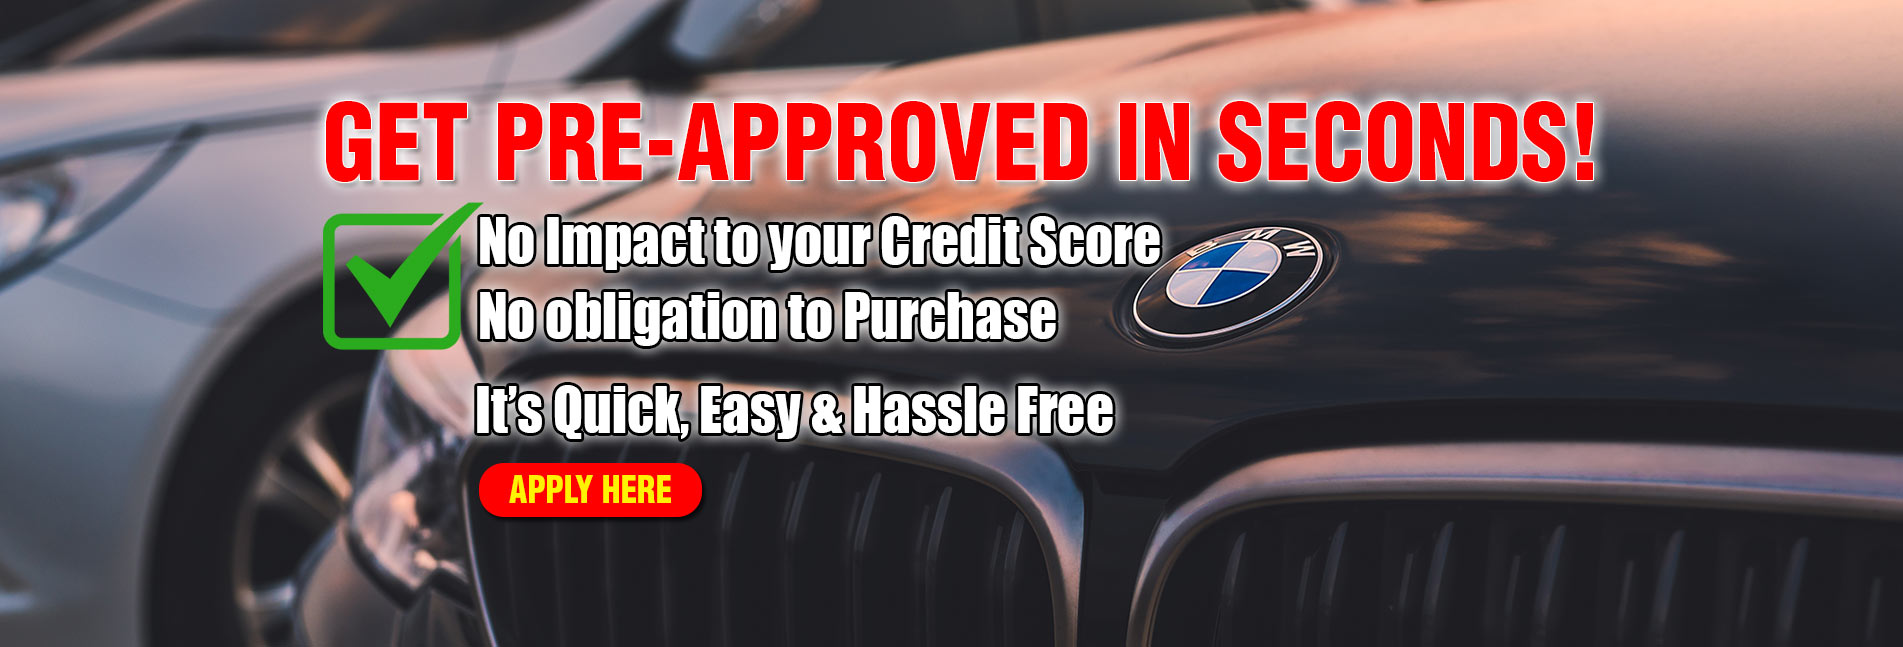 Get Pre-approved in Seconds